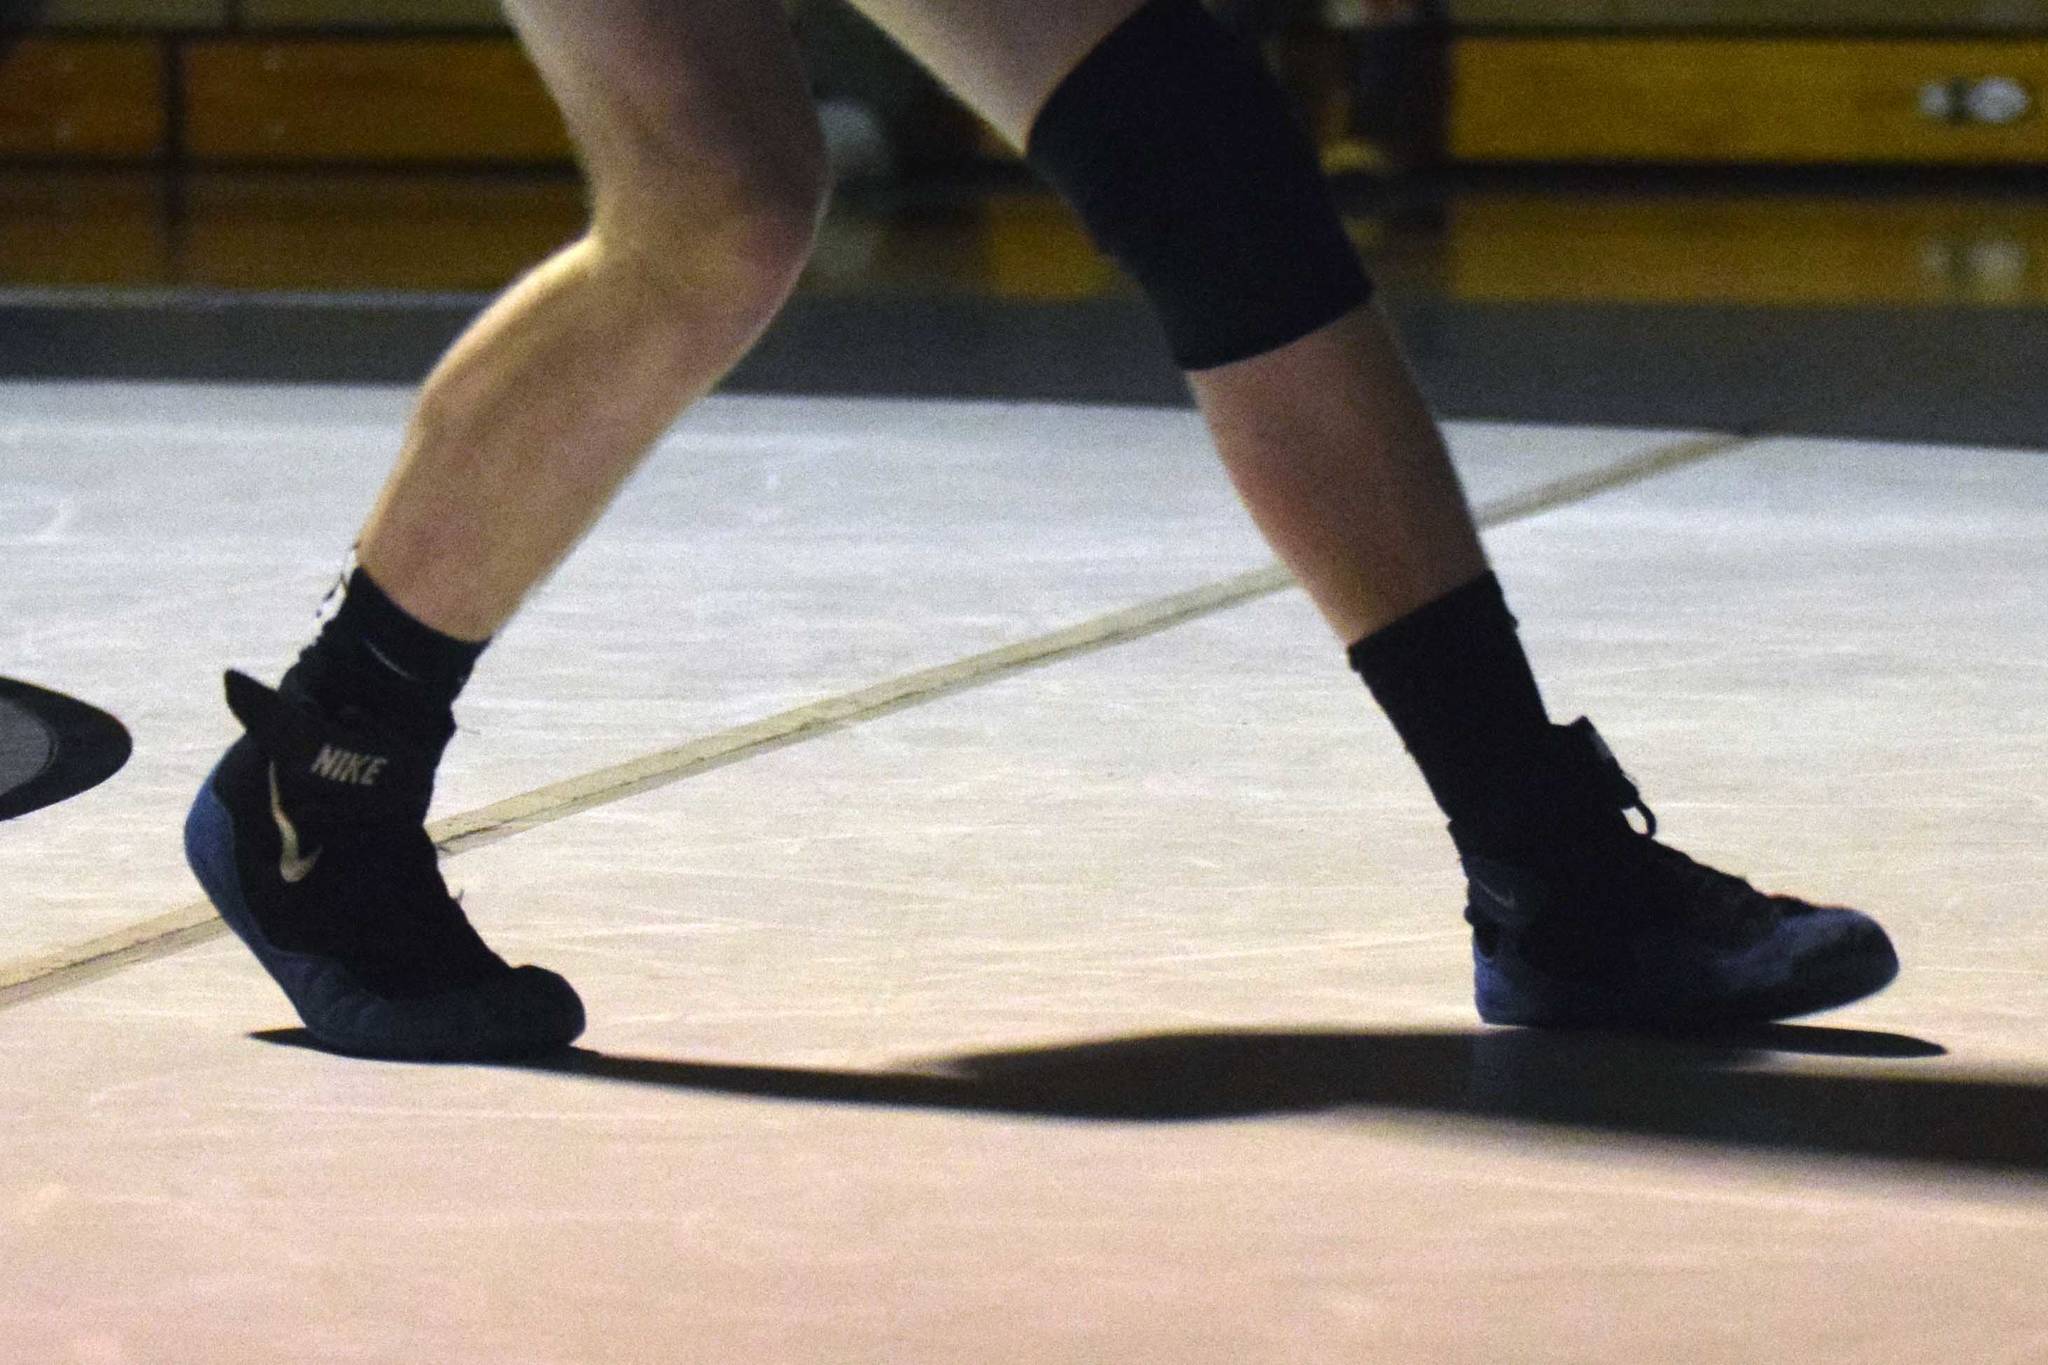 Wrestling roundup: Top Dog, Monster Mash girls and boys, King of the Mountain